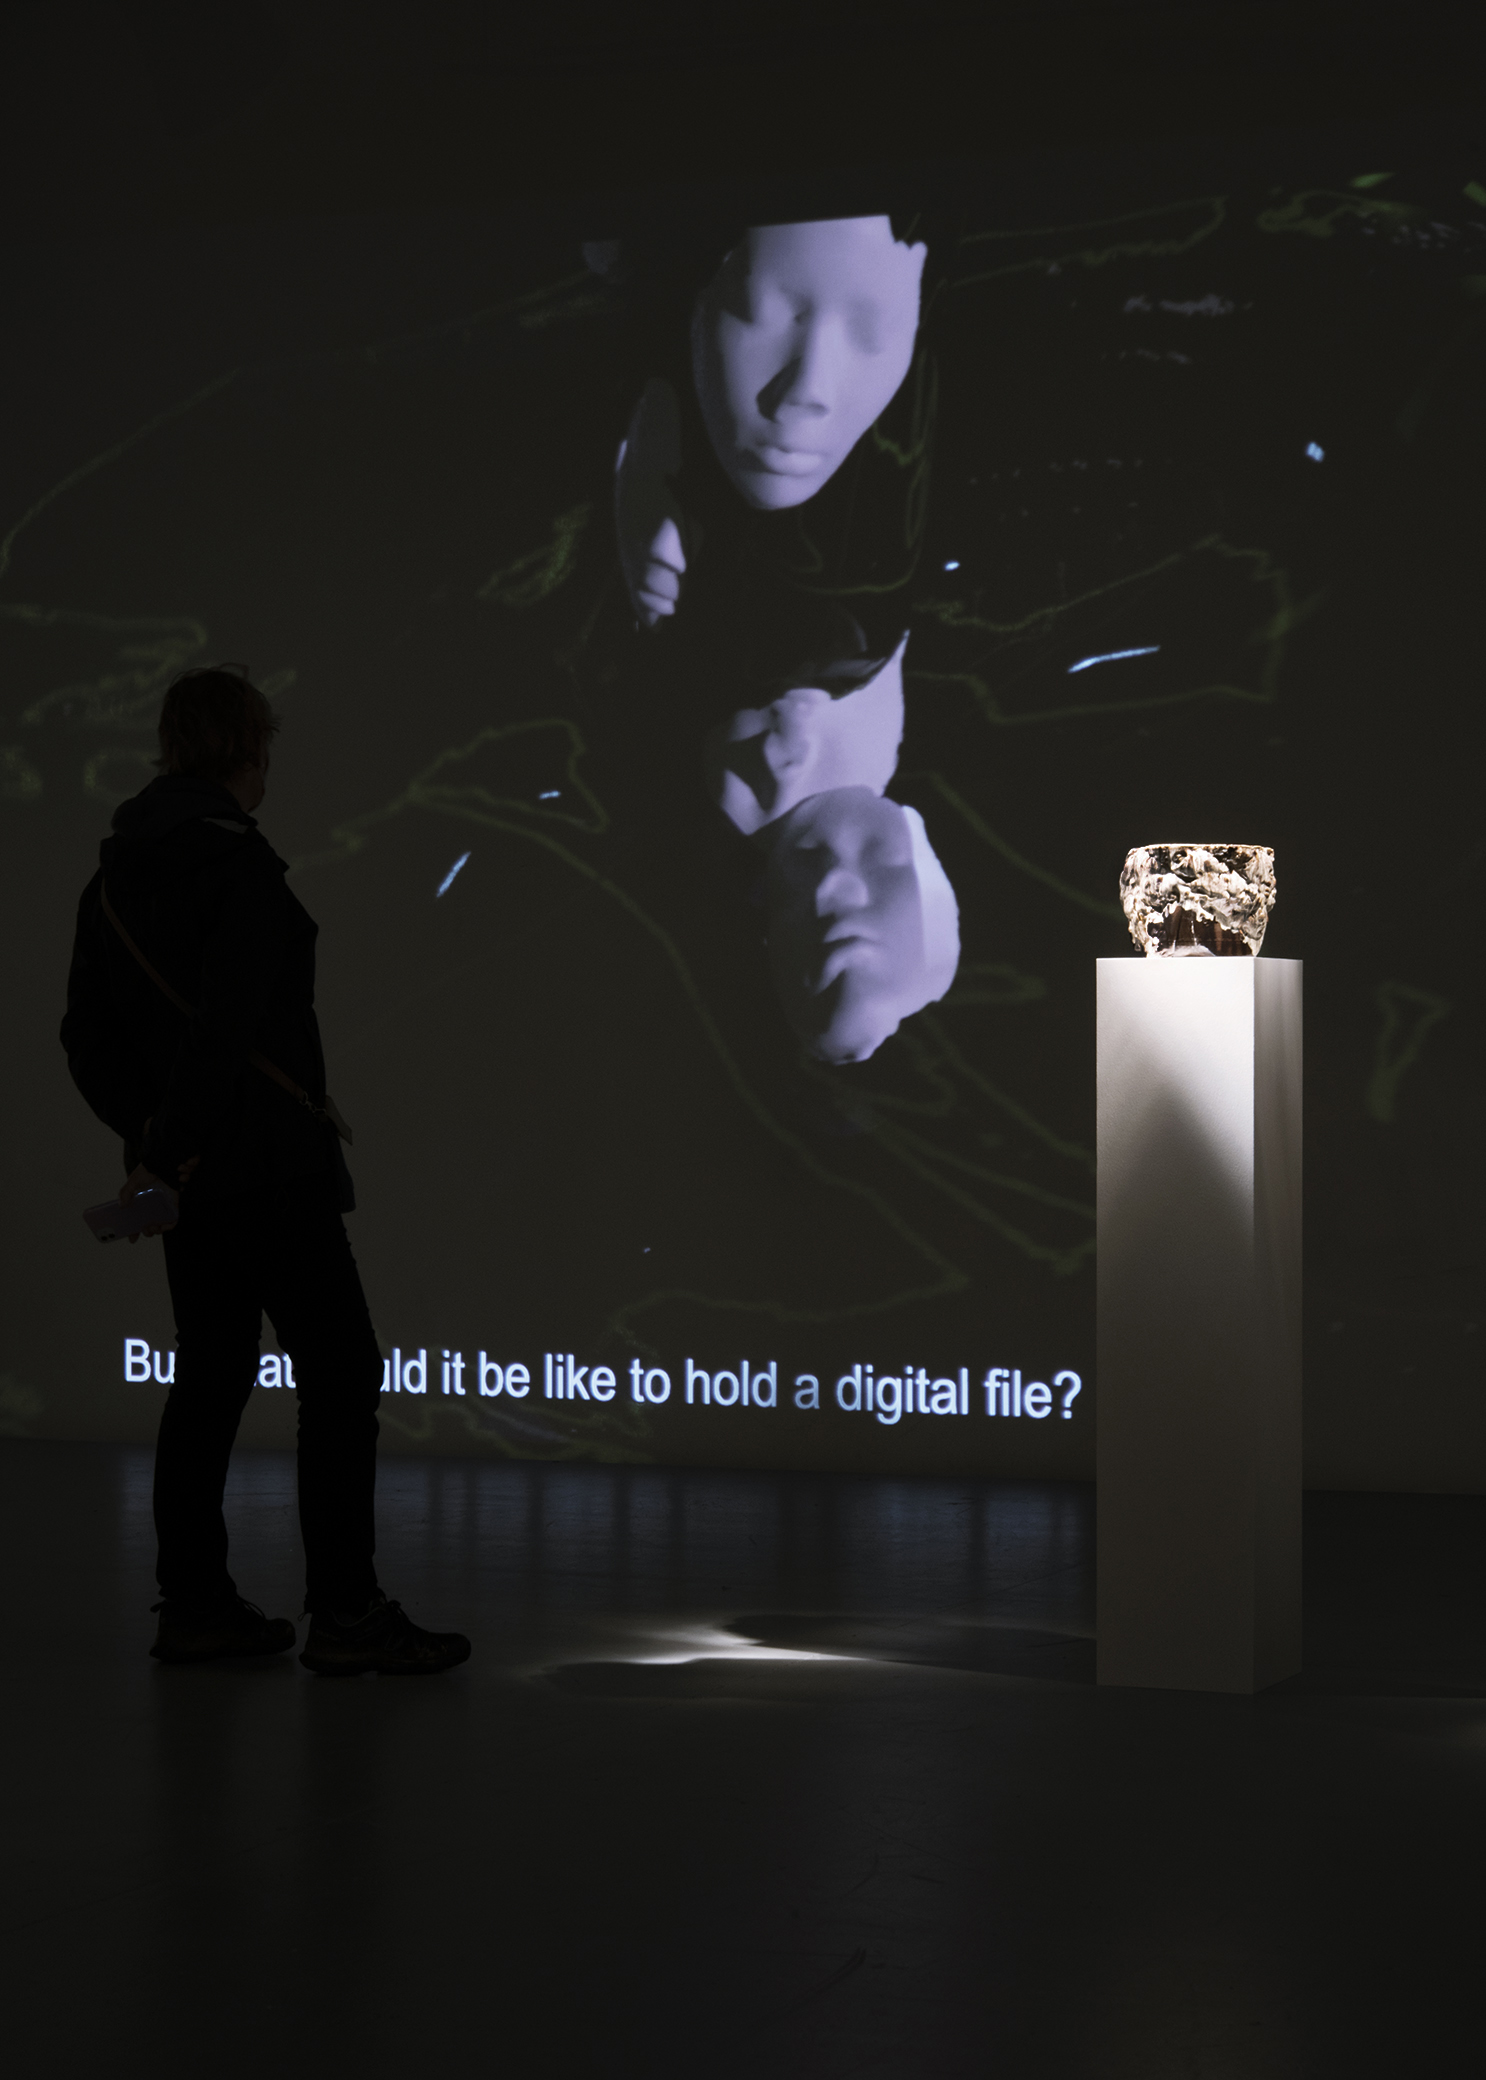 Brown ceramic vessel on a white plinth in a dark room, next to a projection on the wall on the left showing white plaster faces and the text But what would it be like to hold a digital file, but the first part of the text is hidden by the shadow of a person.